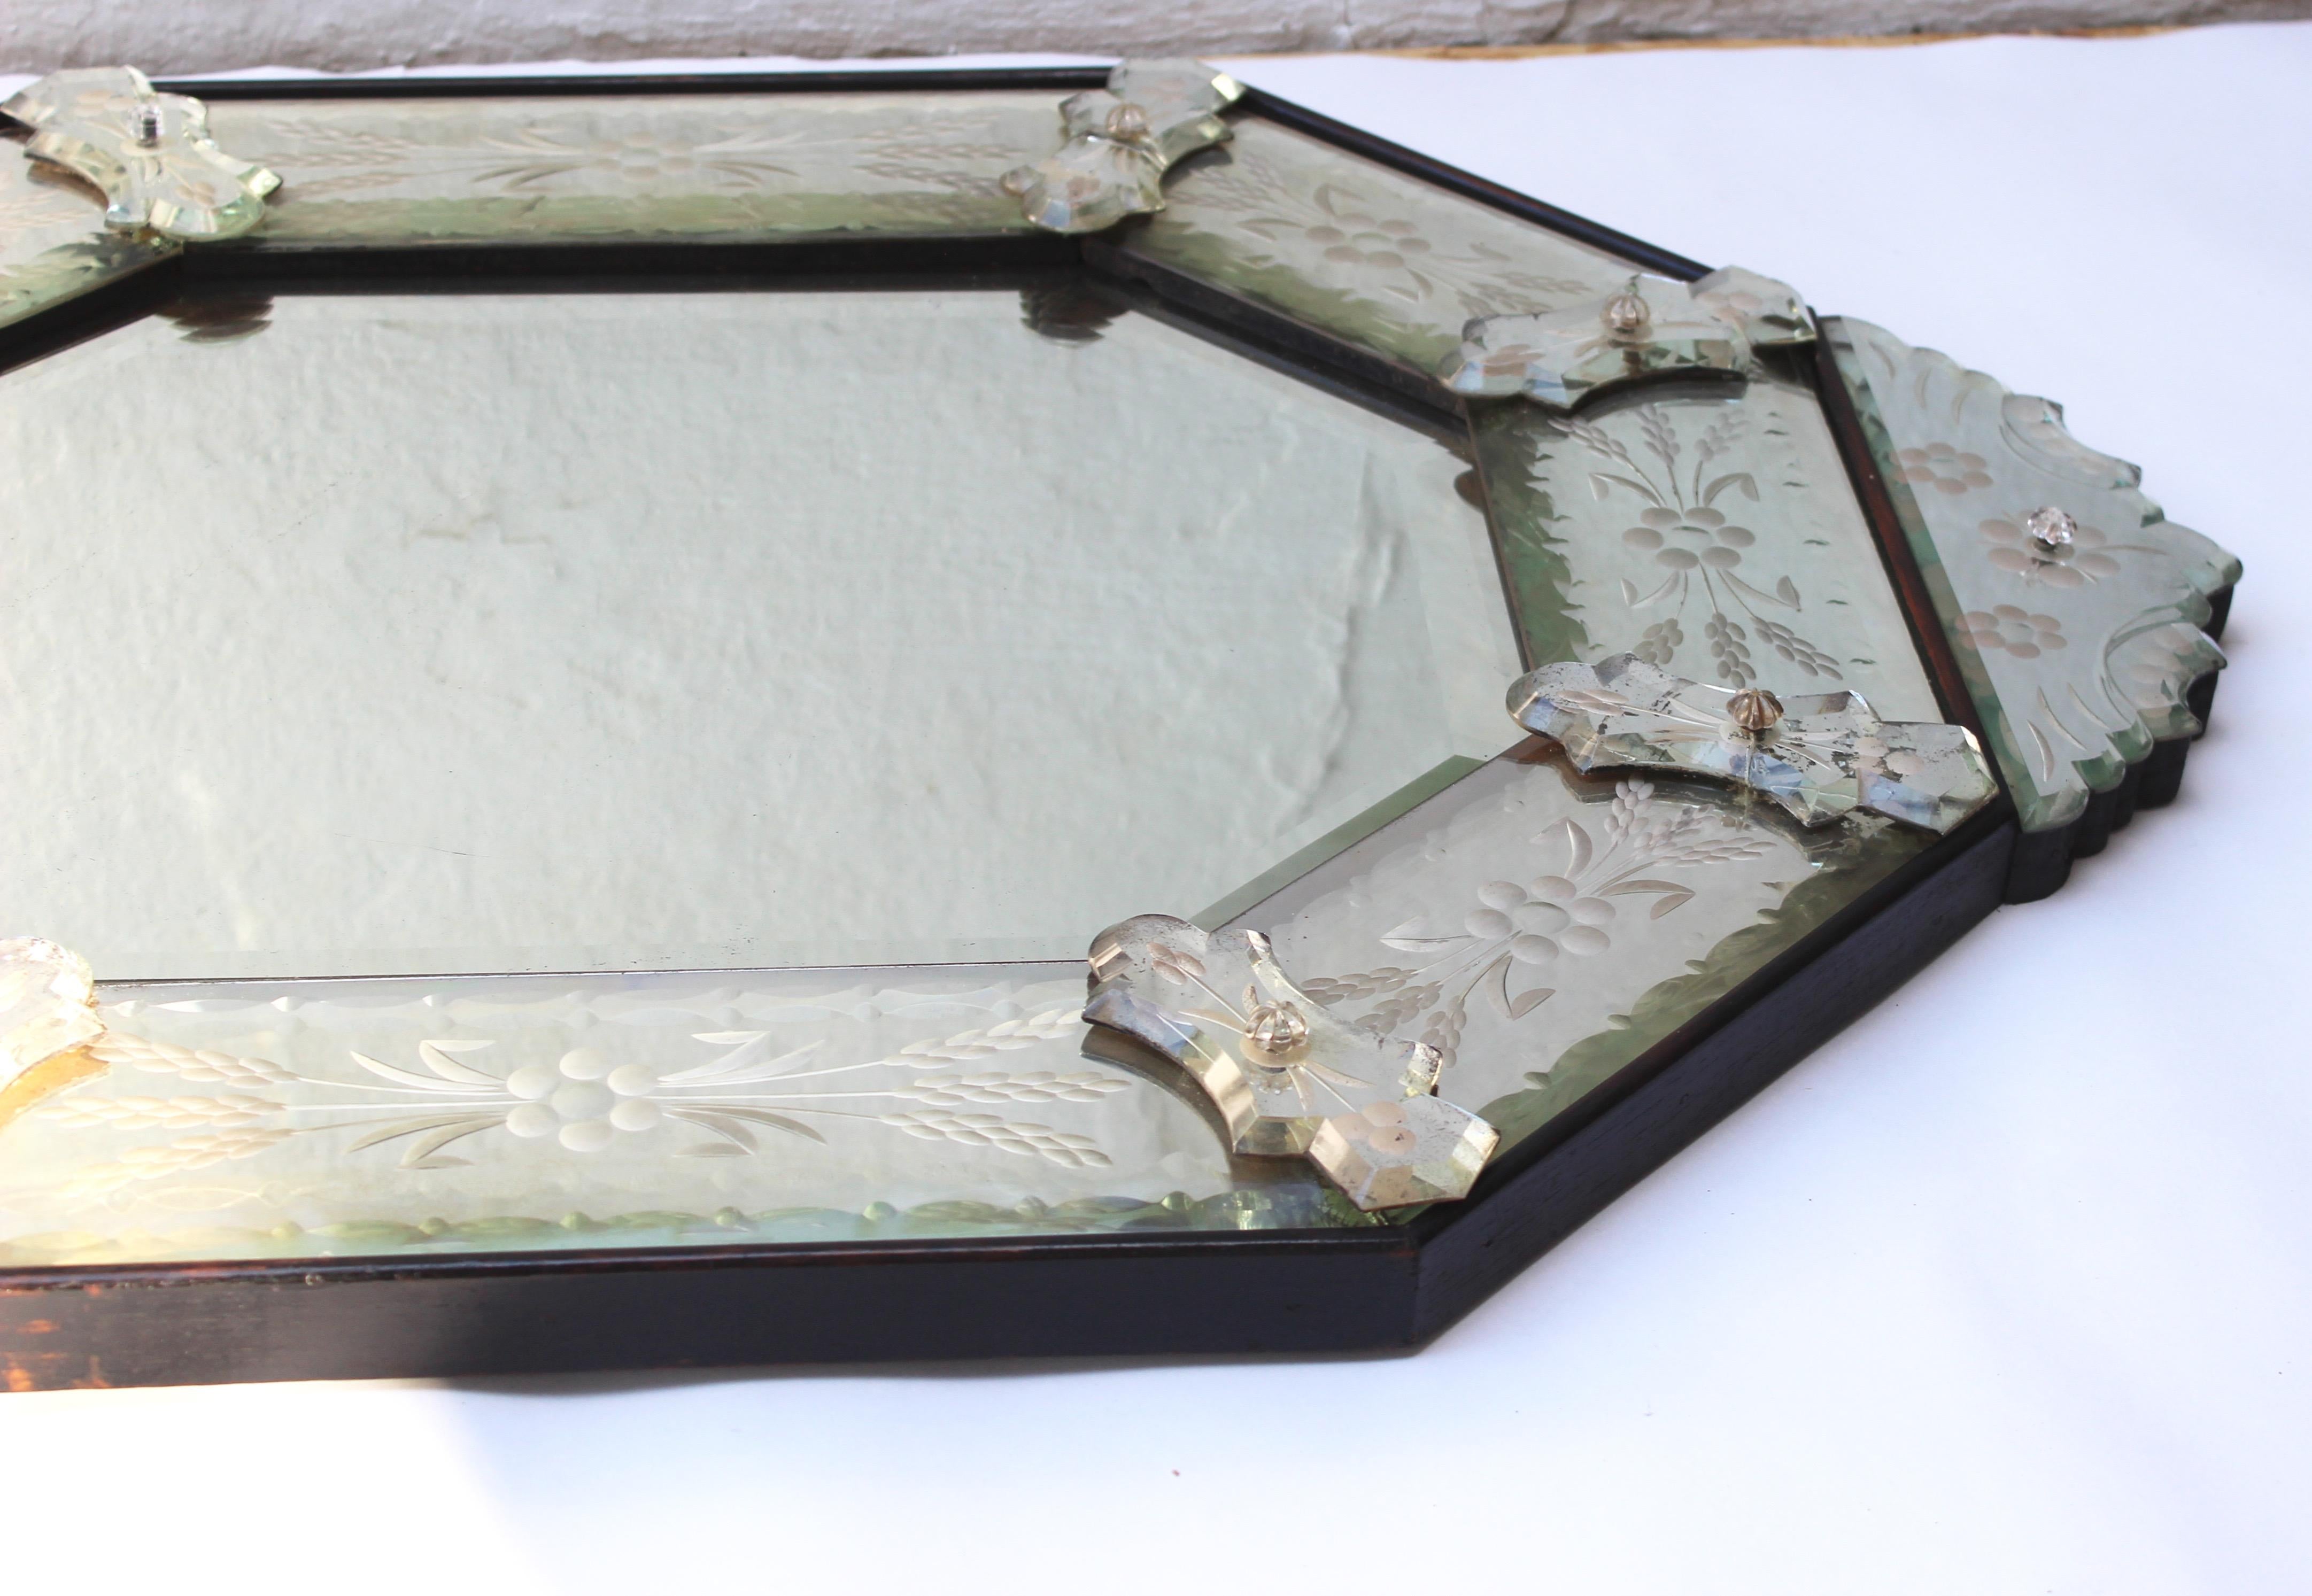 Venetian style etched glass mirror.